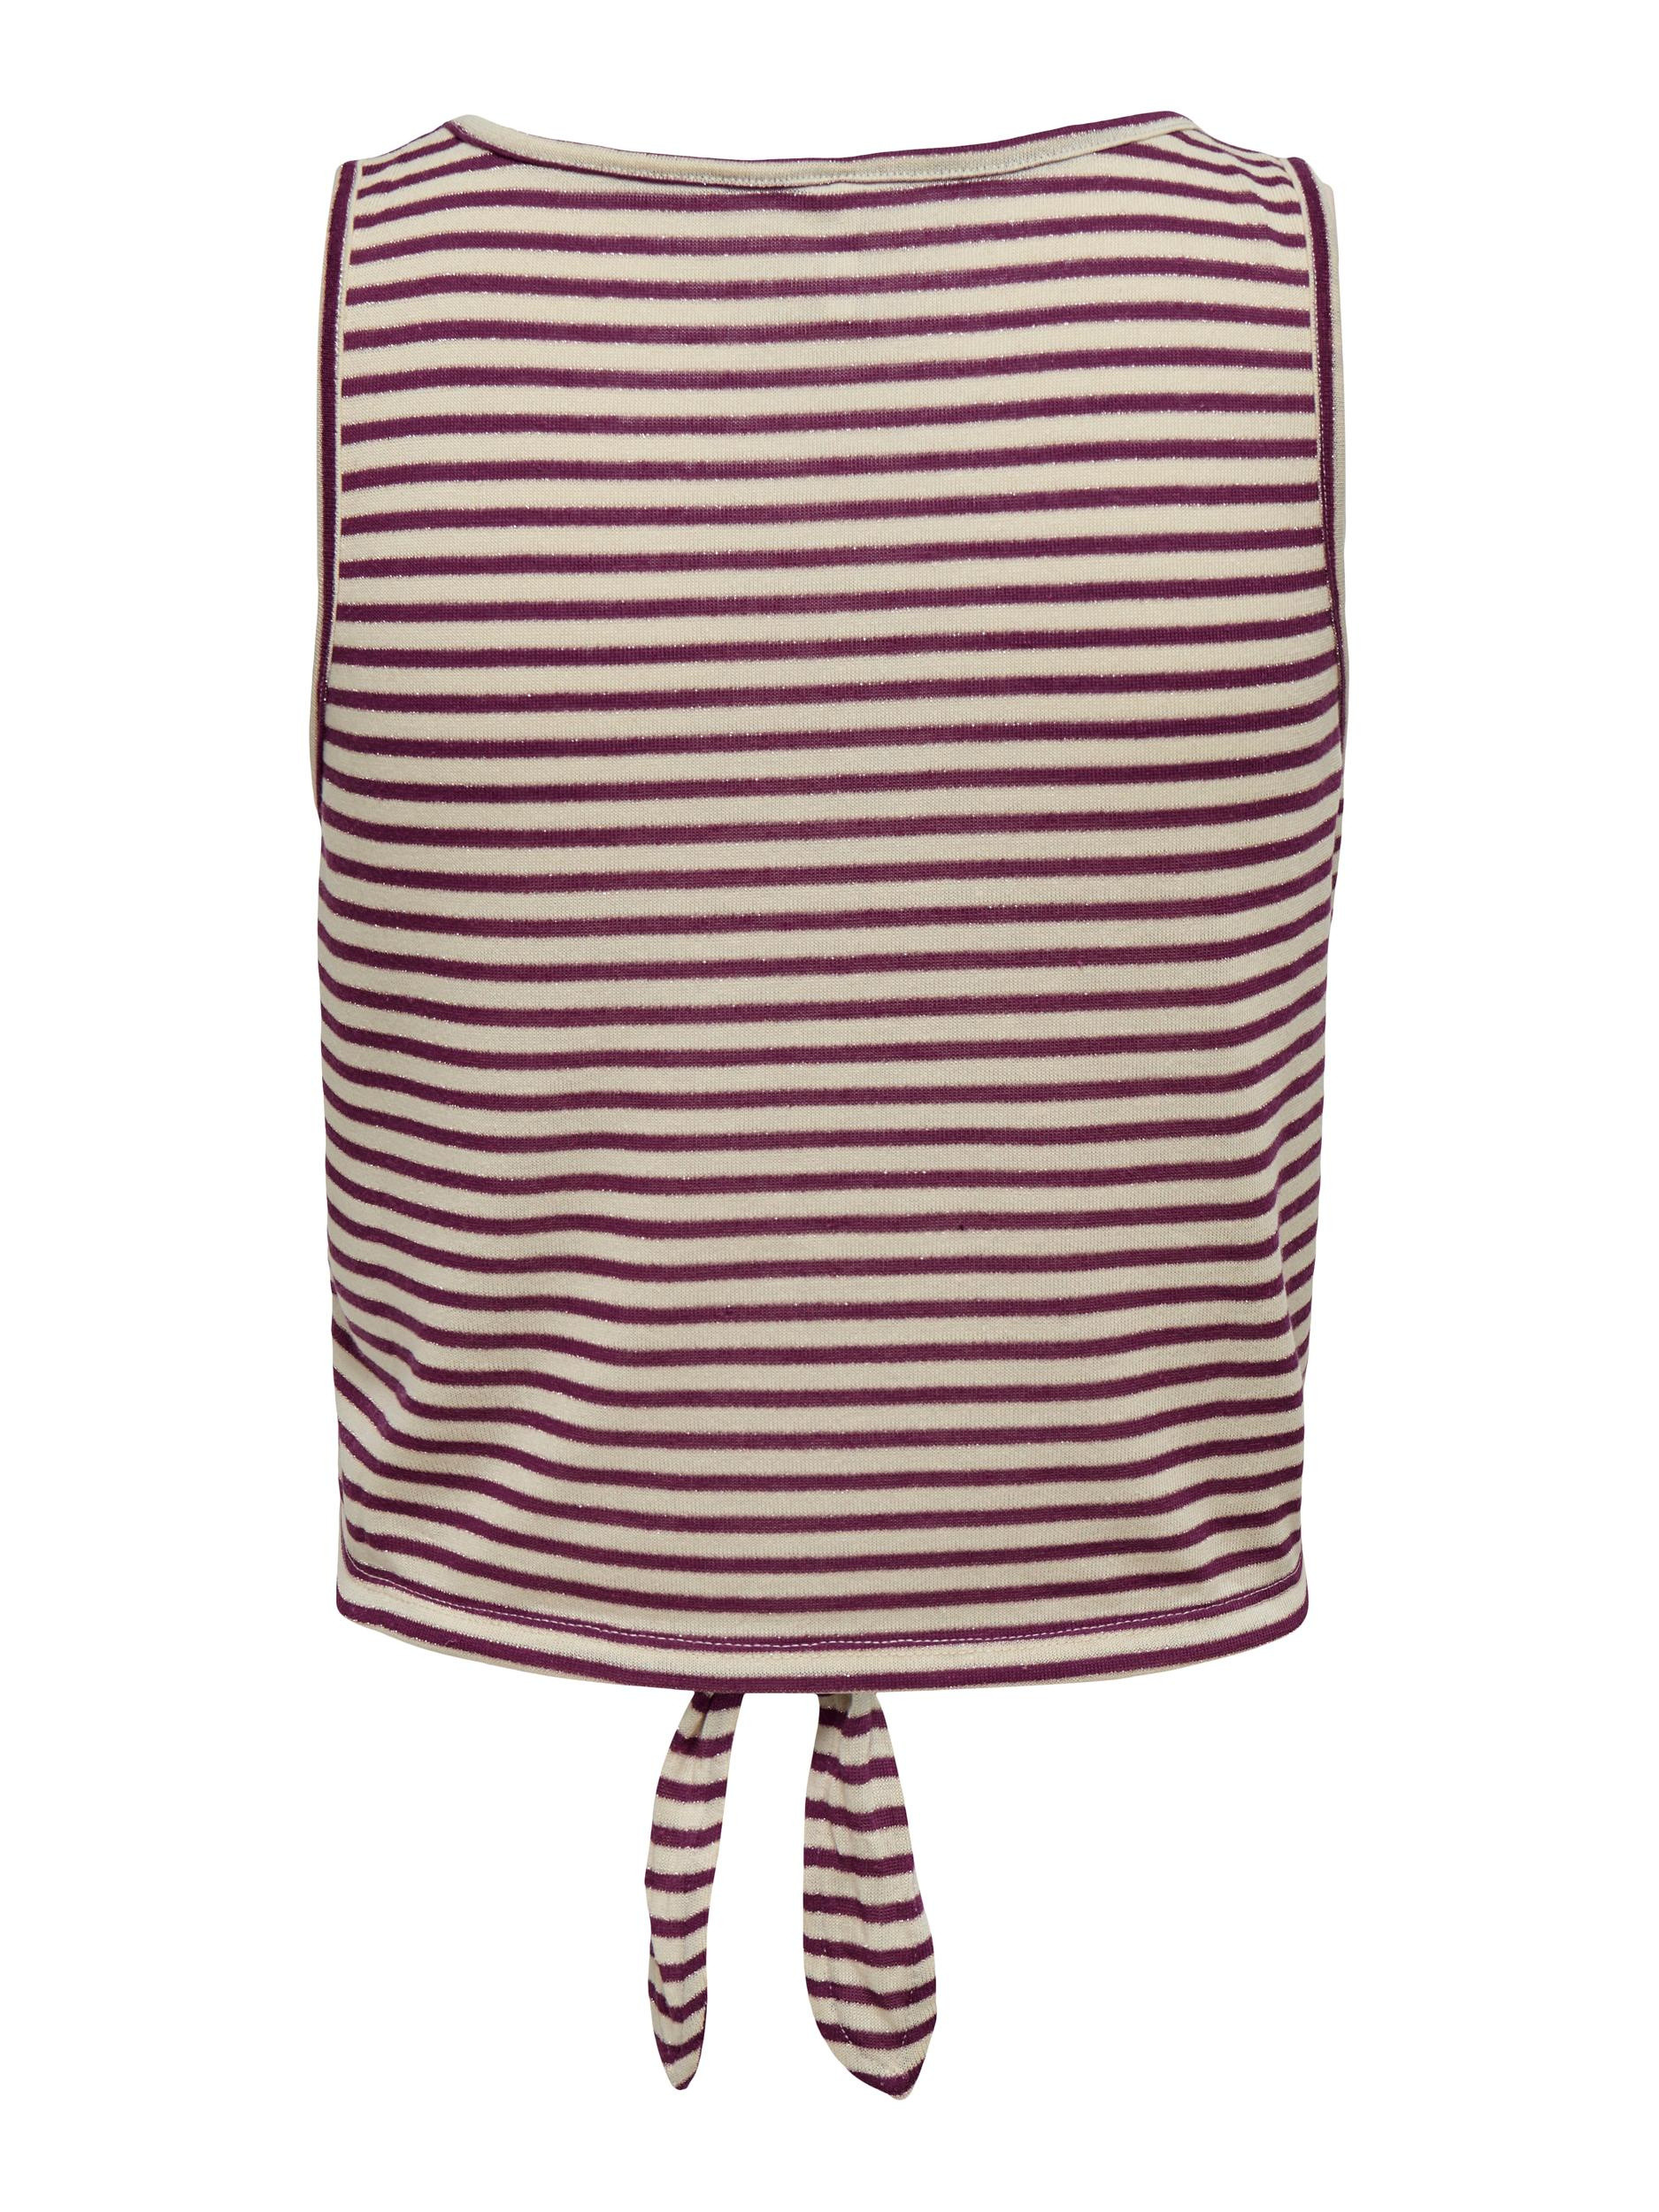 Only - Striped tank top, Dark Pink, large image number 1